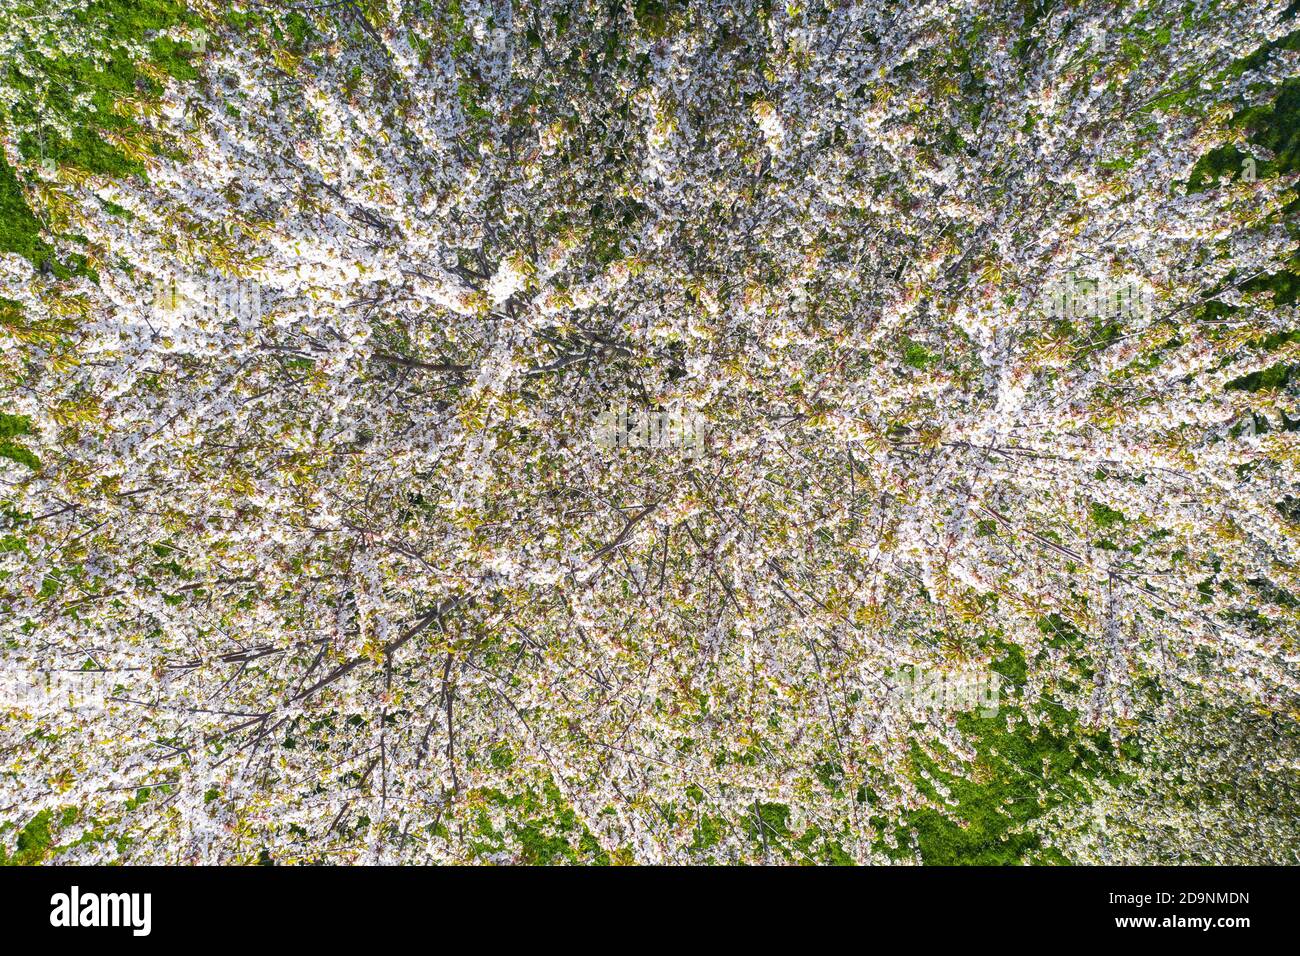 blooming cherry tree from above, near Bad Feilnbach, drone image, Upper Bavaria, Bavaria, Germany Stock Photo